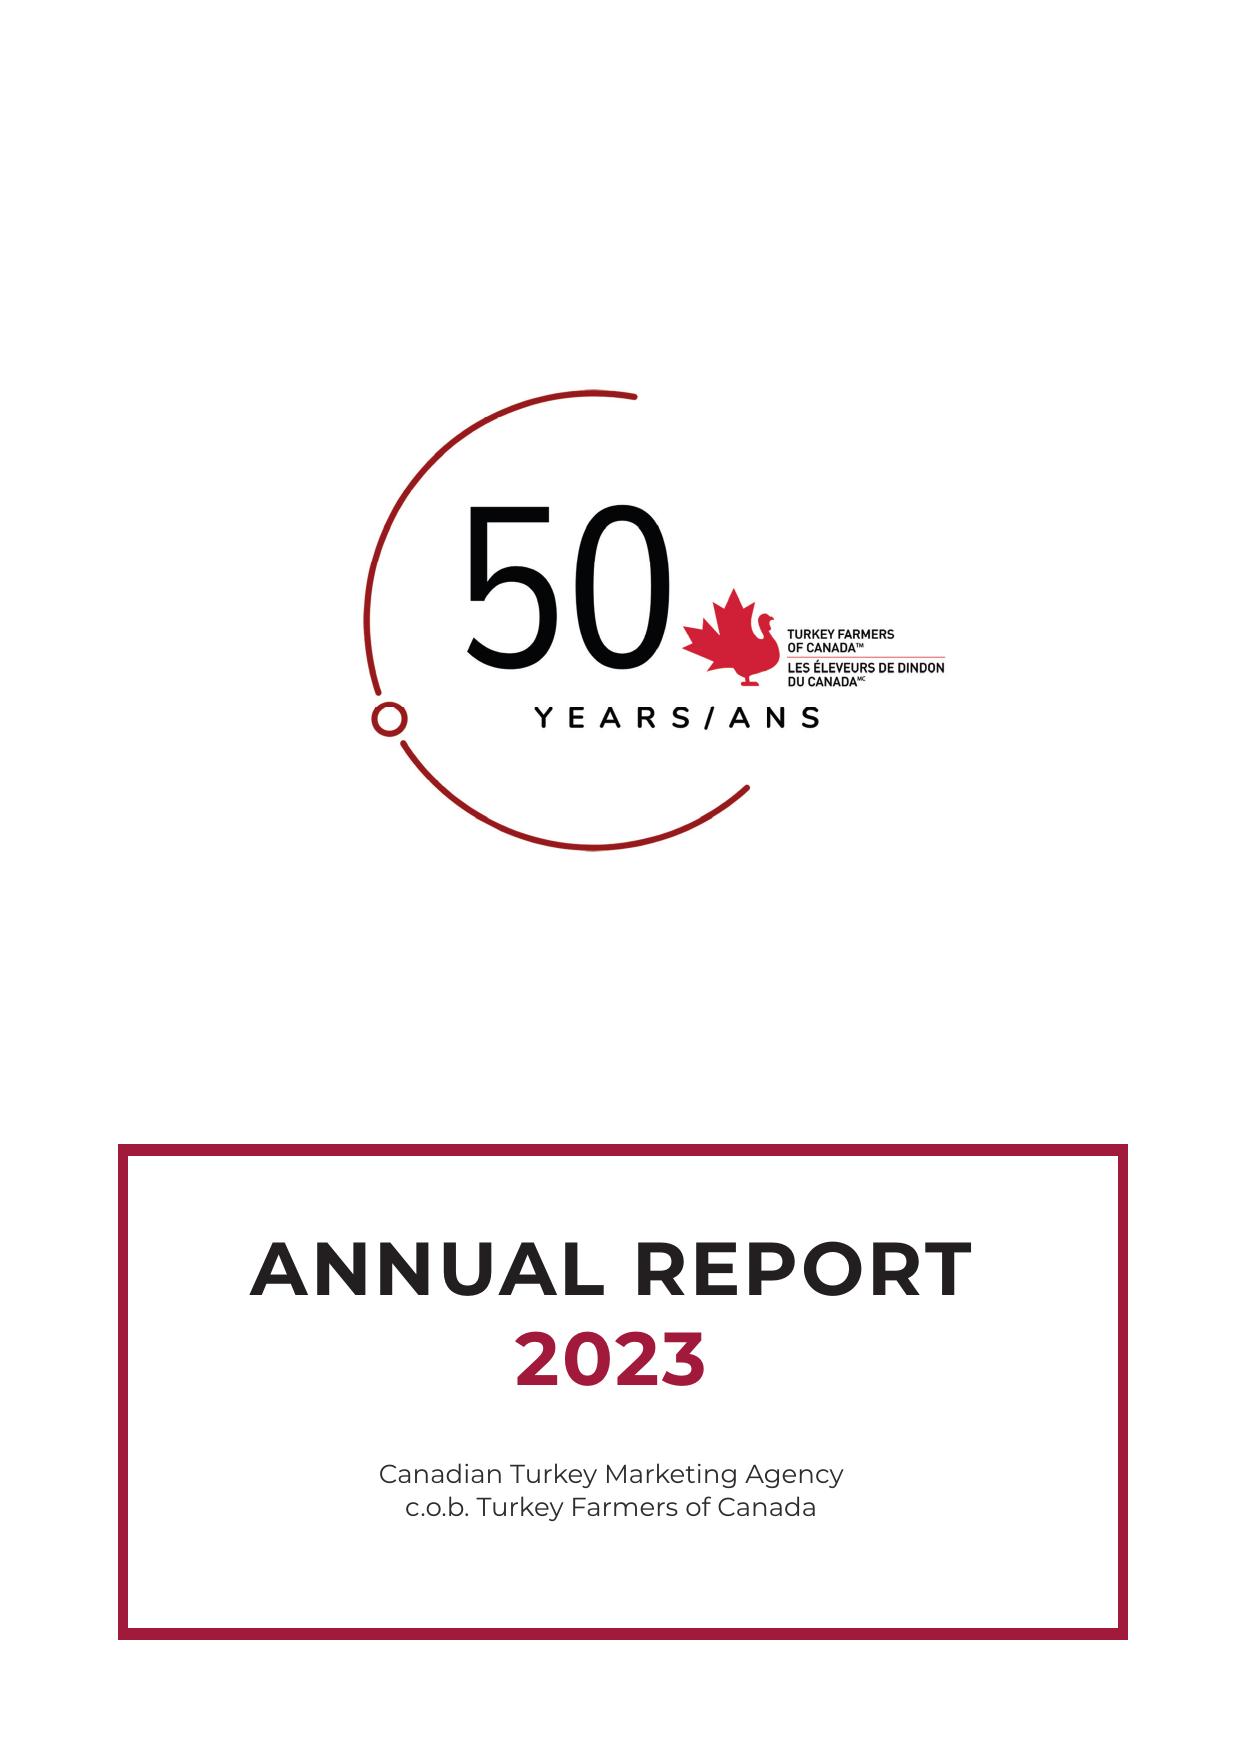 OWNERSHIPID 2023 Annual Report